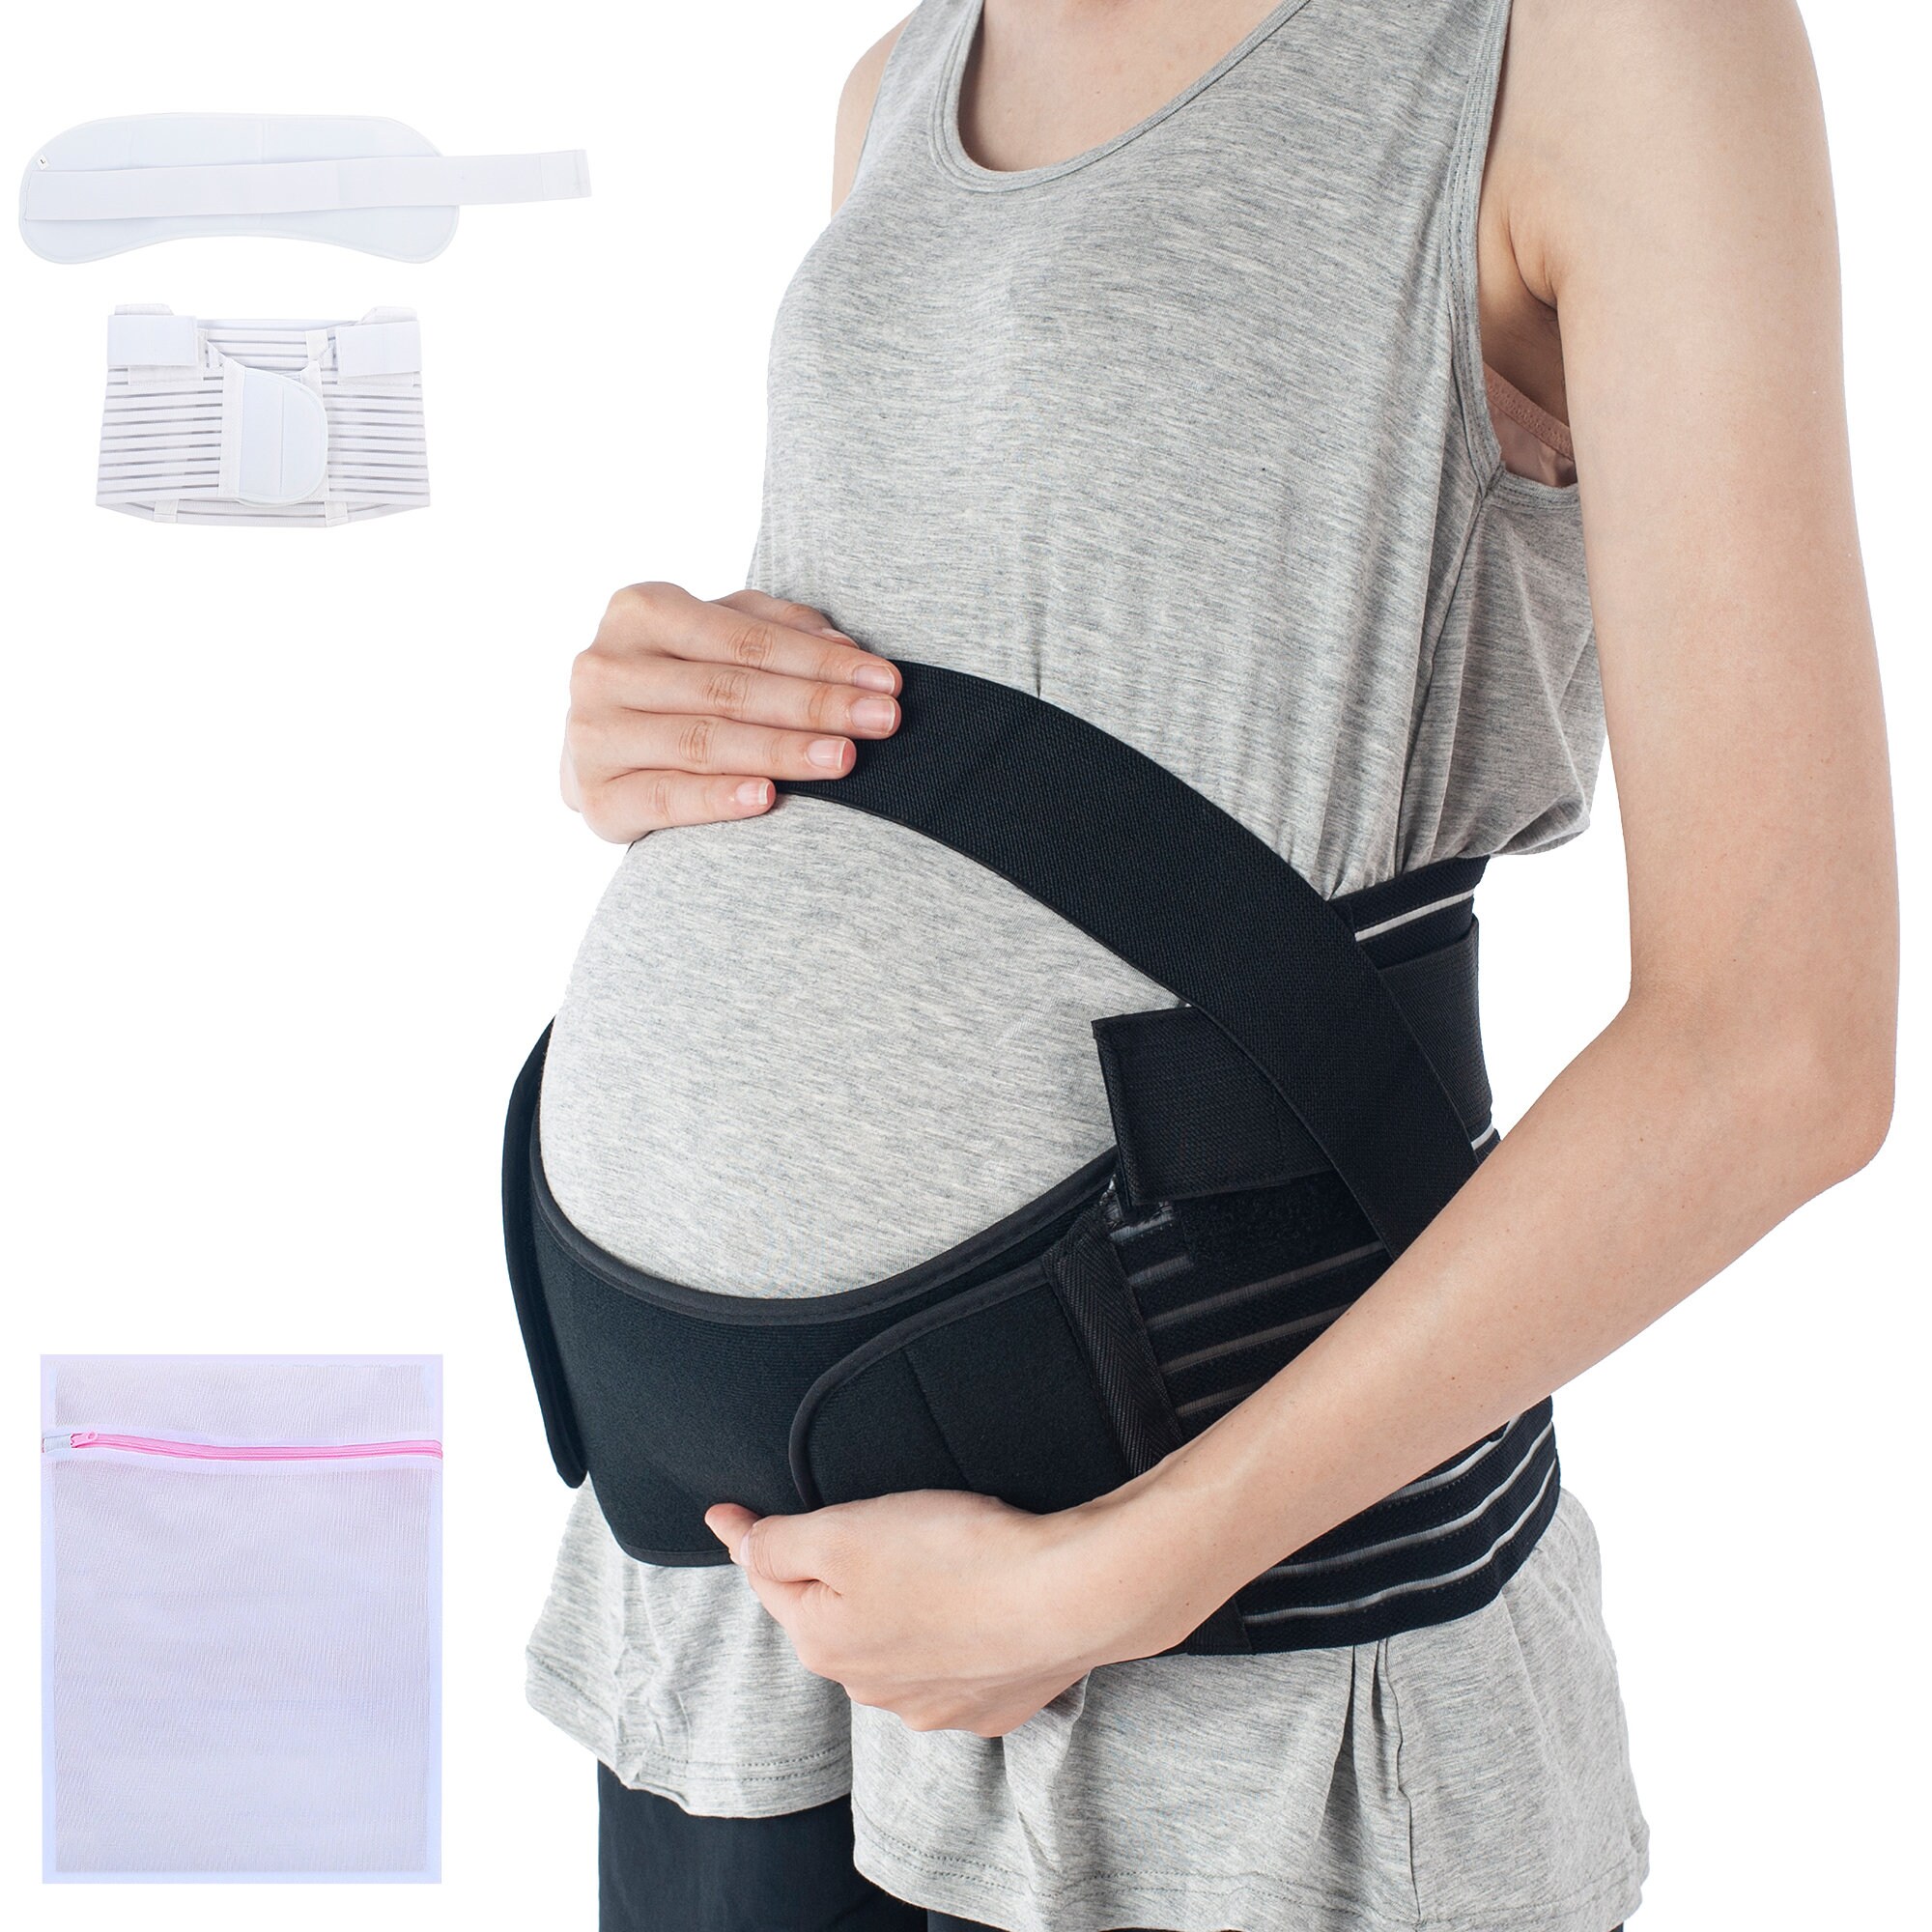 Black NIUJIASI Pregnancy Belly Support Band with Shoulder Strap for Back M Maternity Waist/Back/Abdomen Band Hip & Pelvic Pressure Relief 